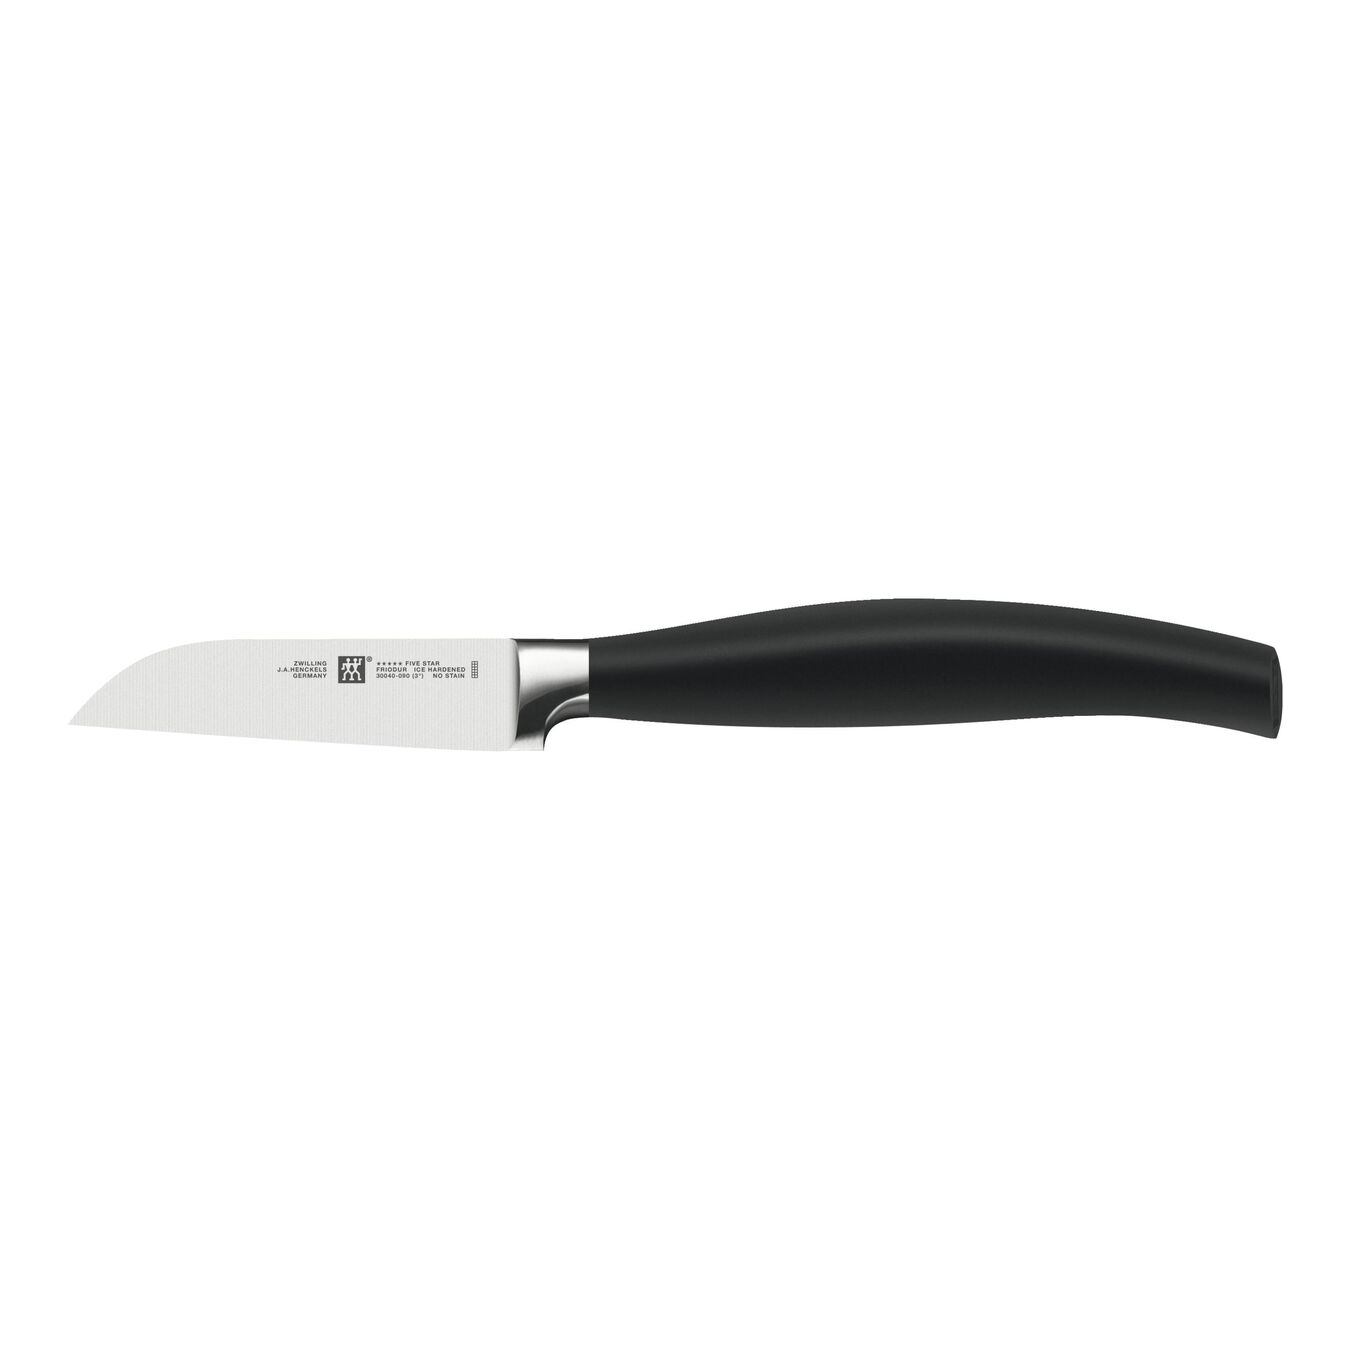 3.5-inch, Vegetable knife - Visual Imperfections,,large 1